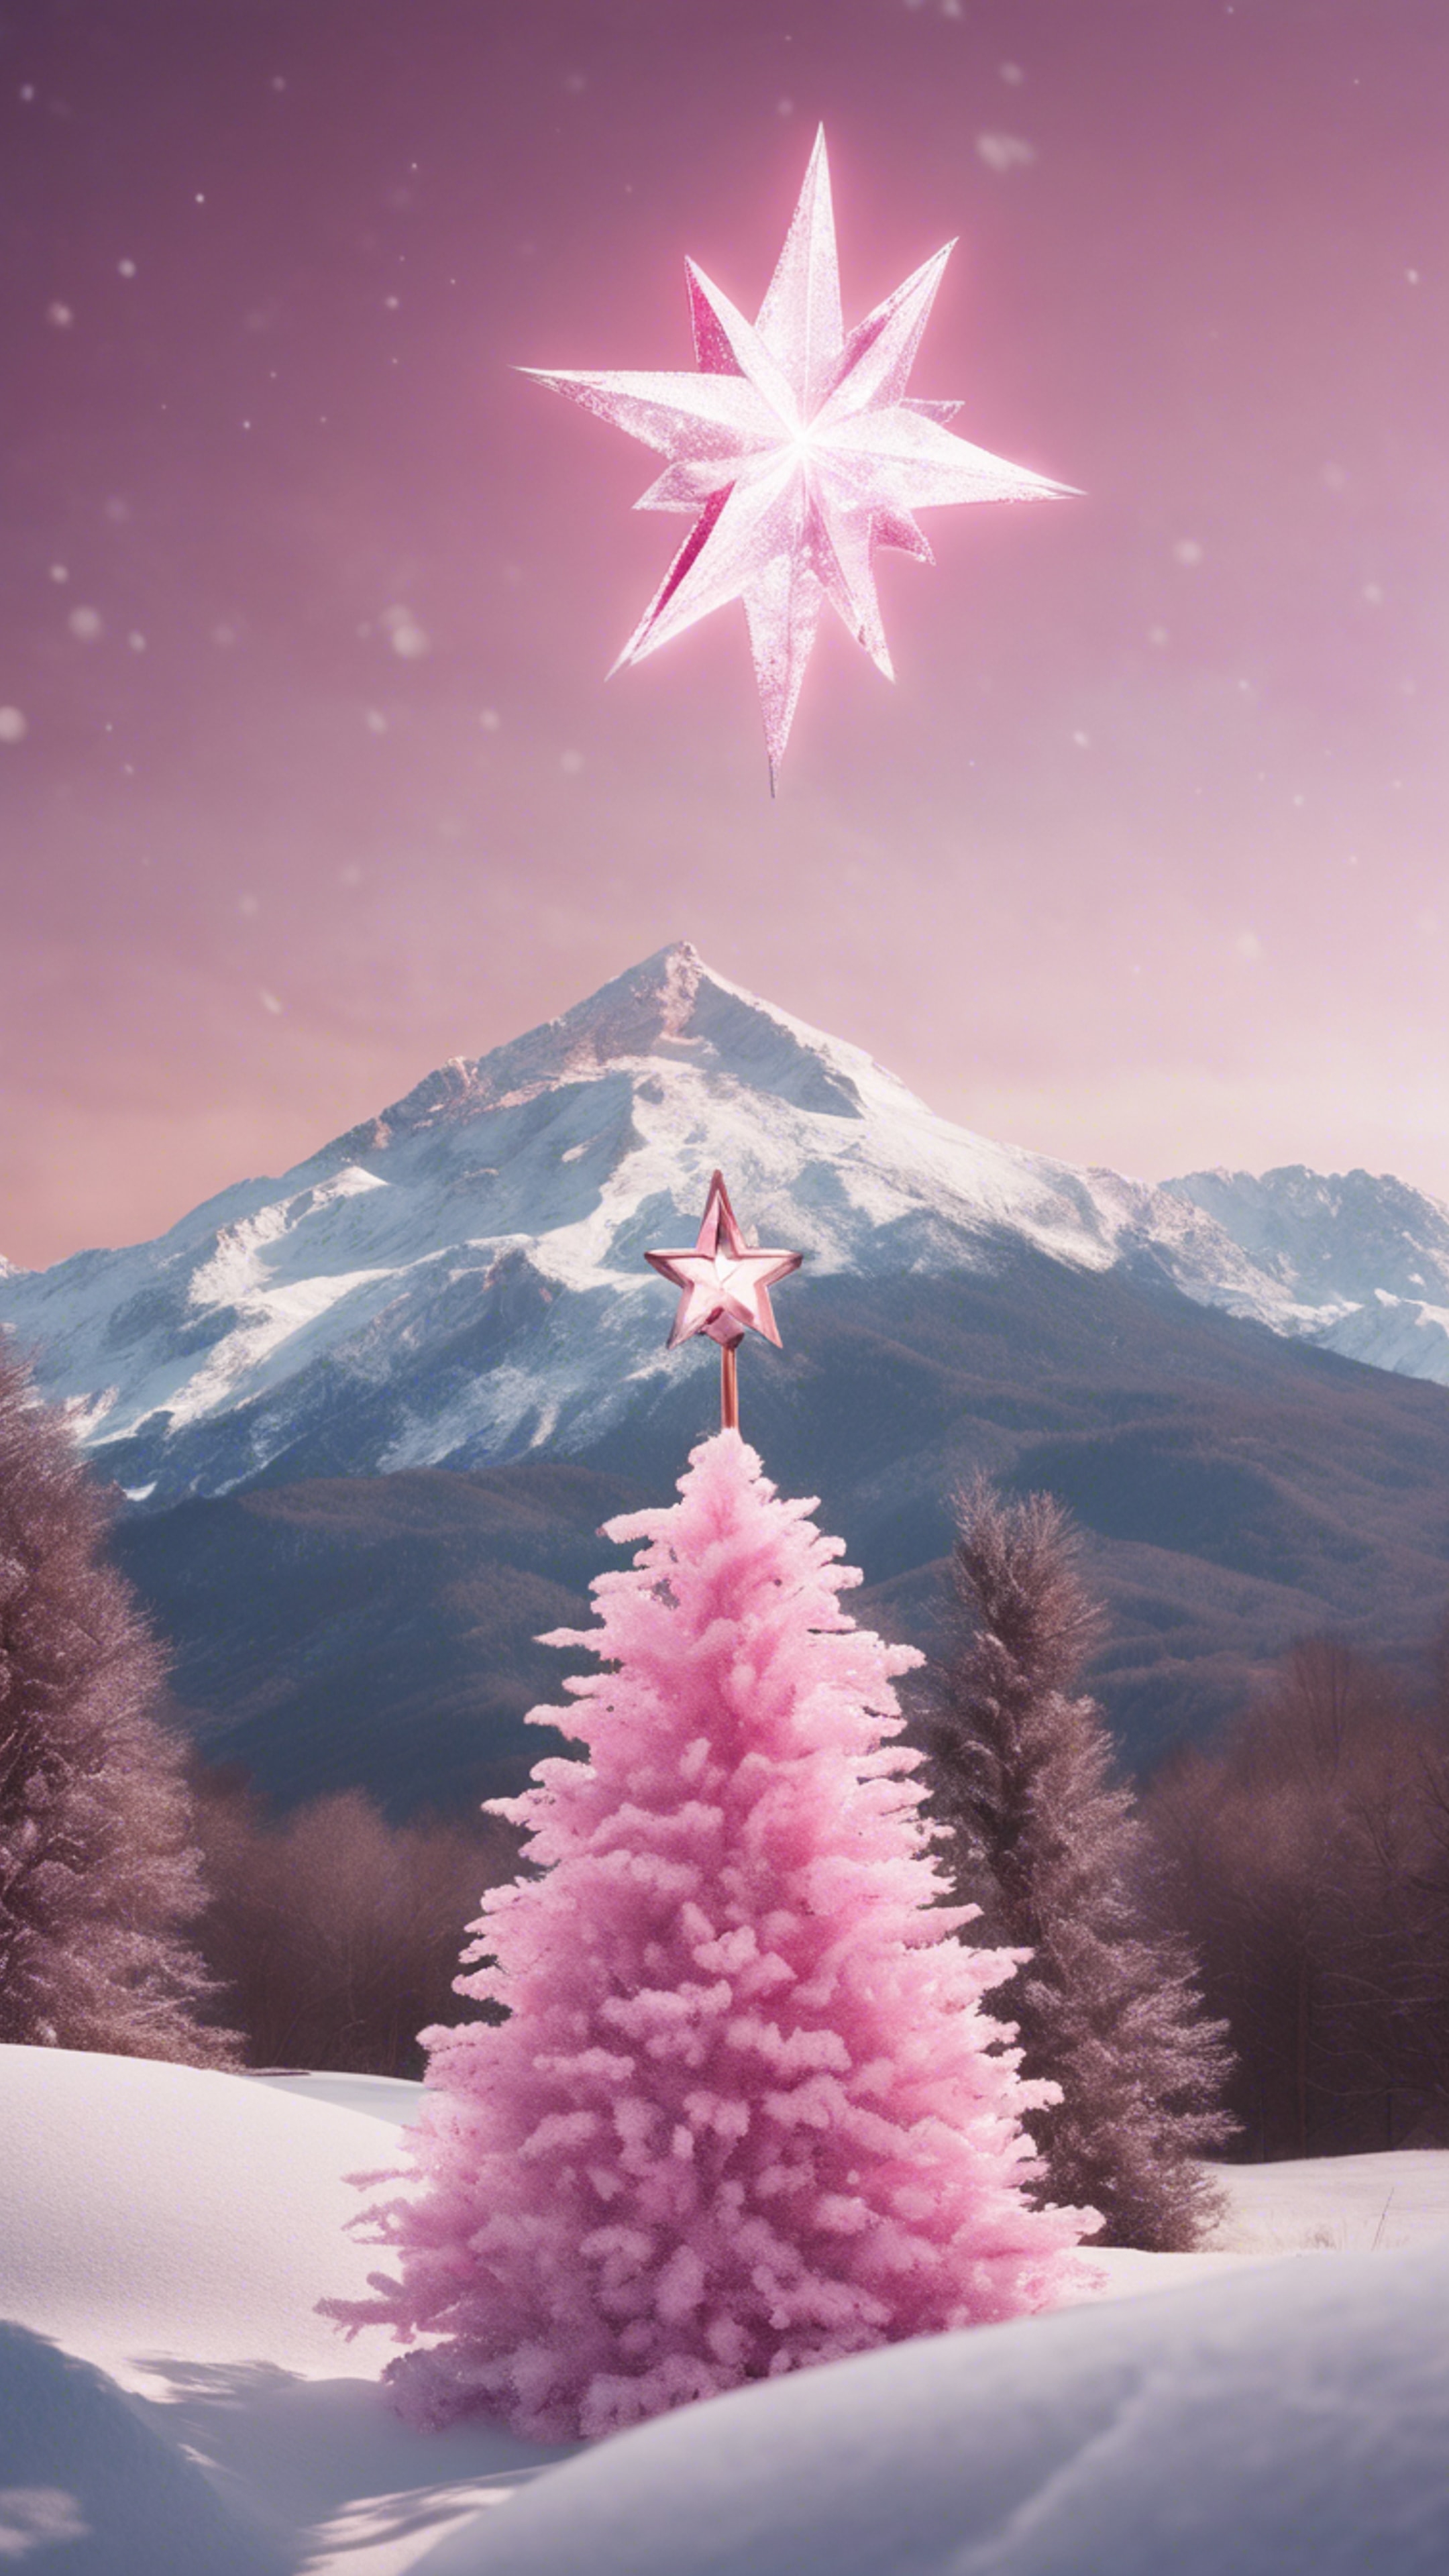 Distant view of a snow-clad mountain with a pink Christmas star shining brightly in the foreground. ផ្ទាំង​រូបភាព[48430a4d610446a898be]